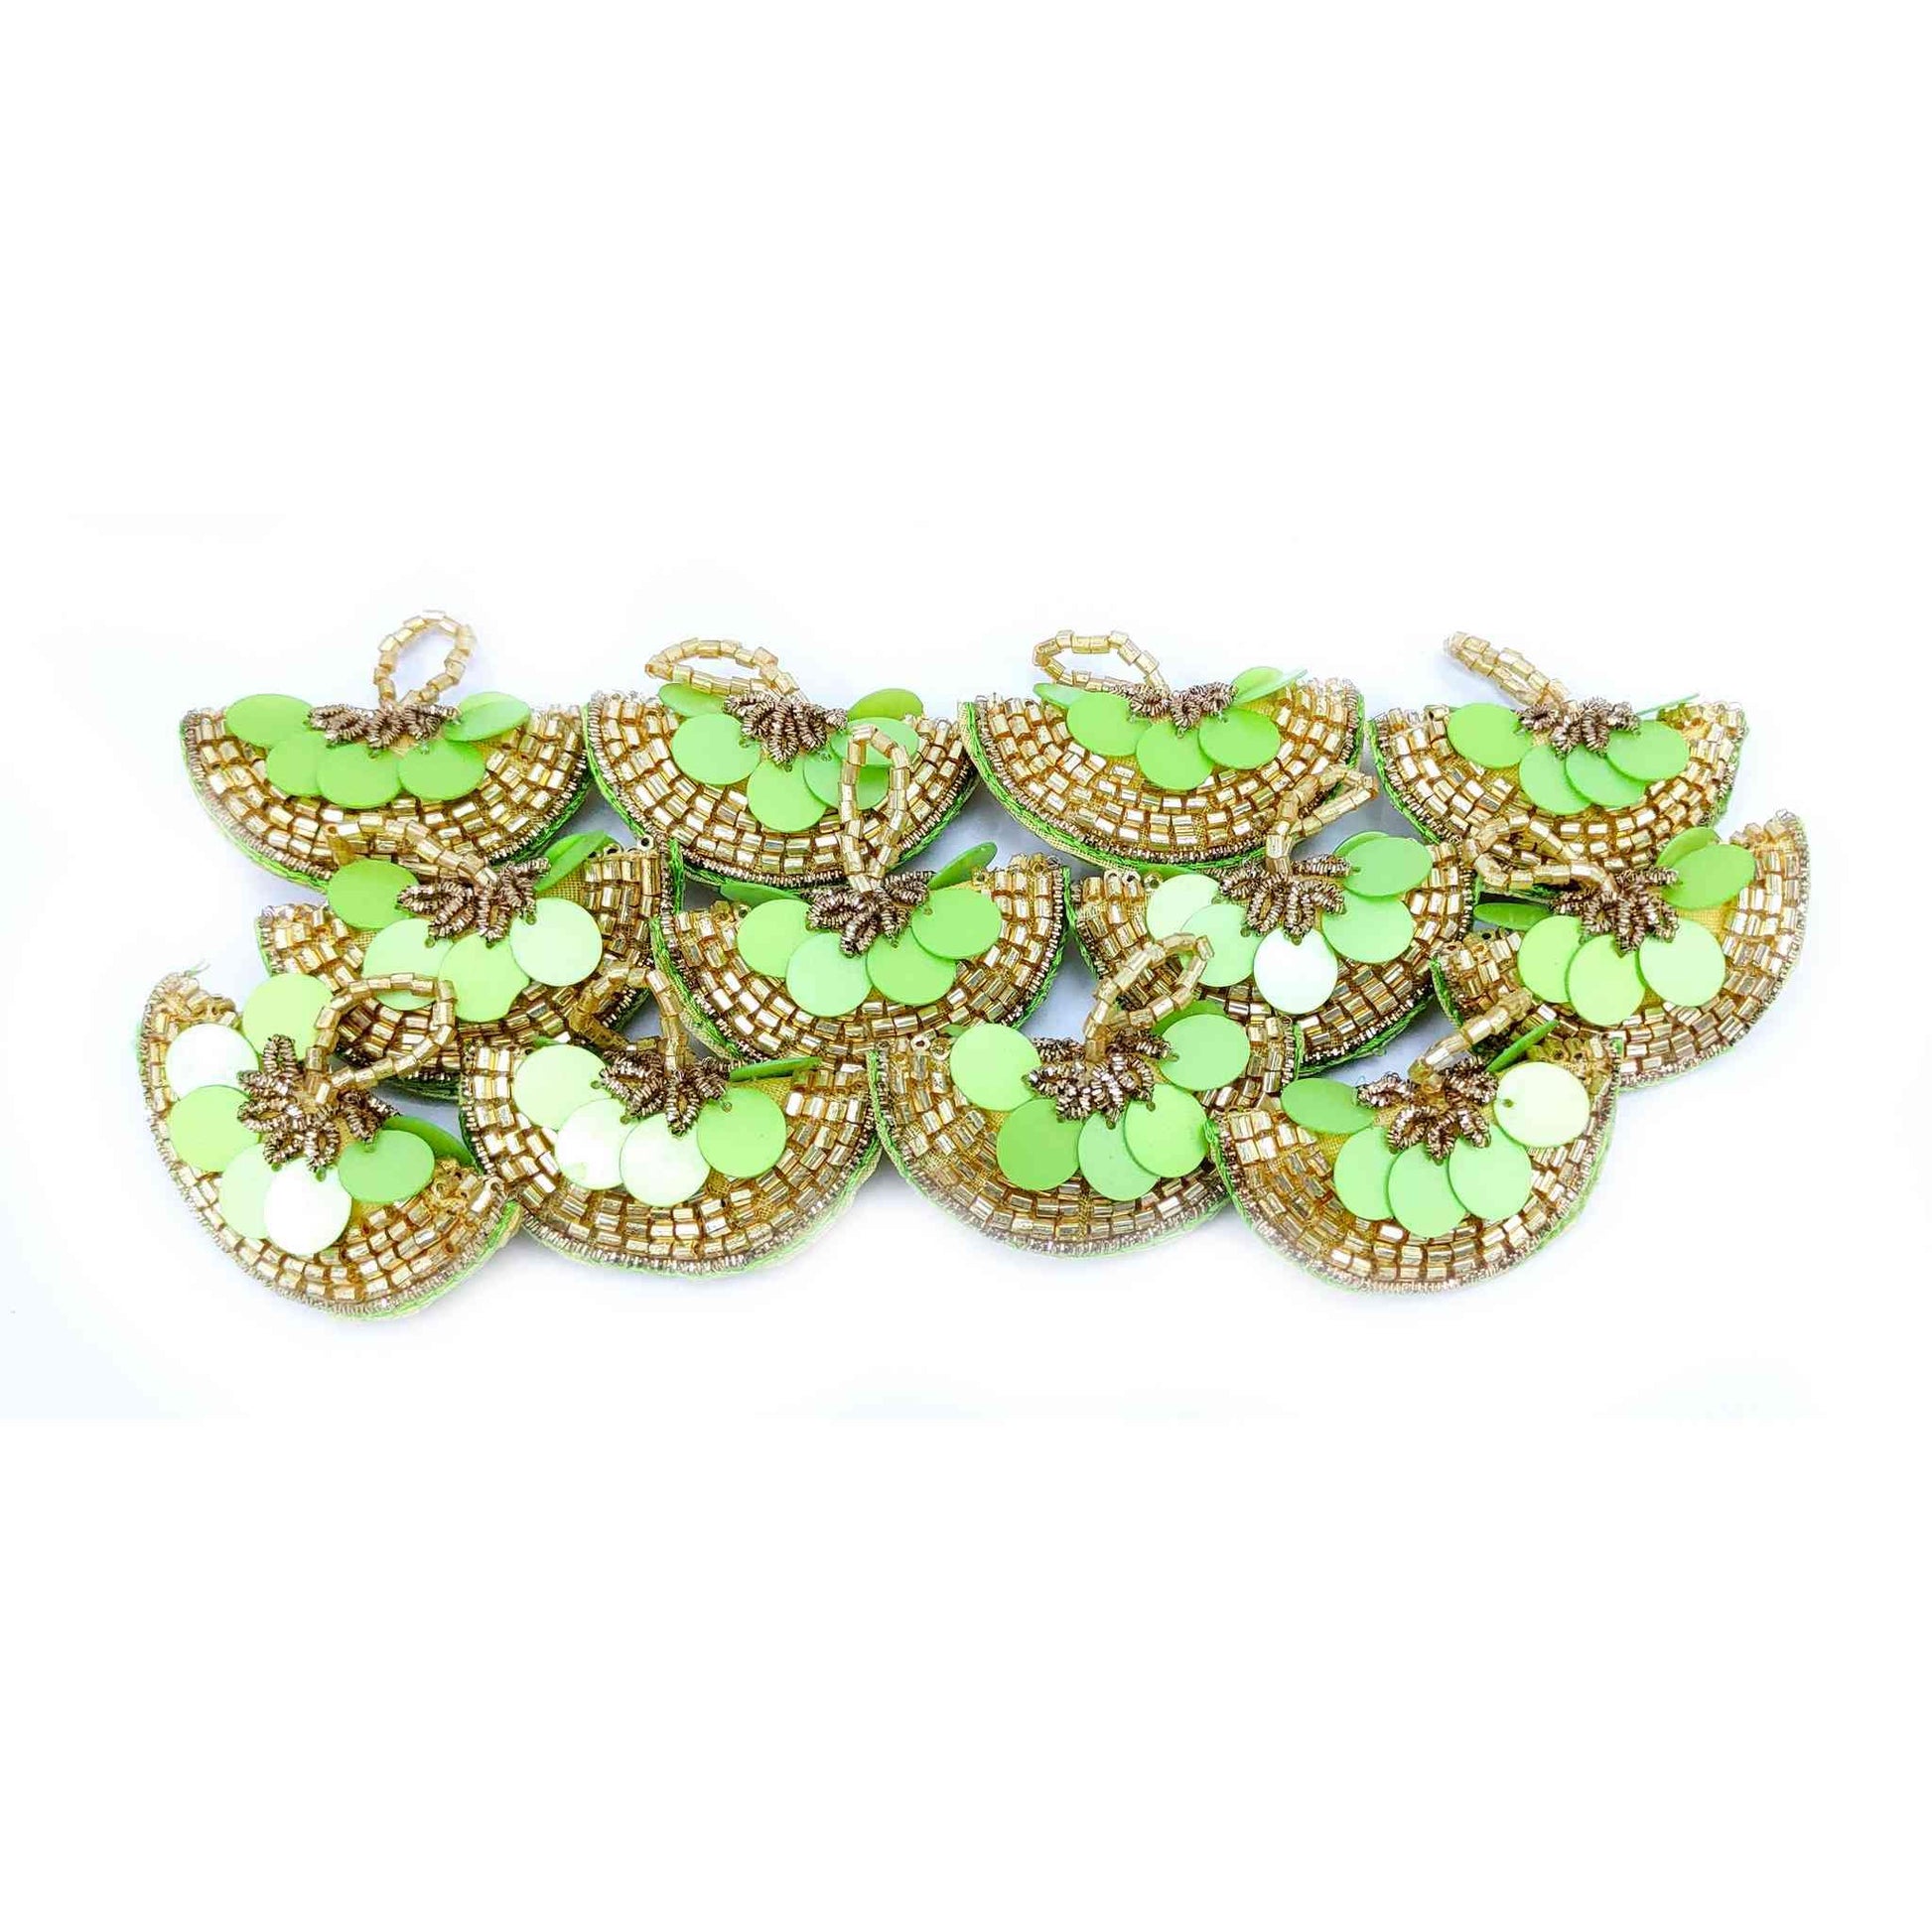 Designer Sequence Latkan Buti for DIY Craft, Trouseau Packing or Decoration (Bunch of 12) - Design 201, Light Green - Indian Petals